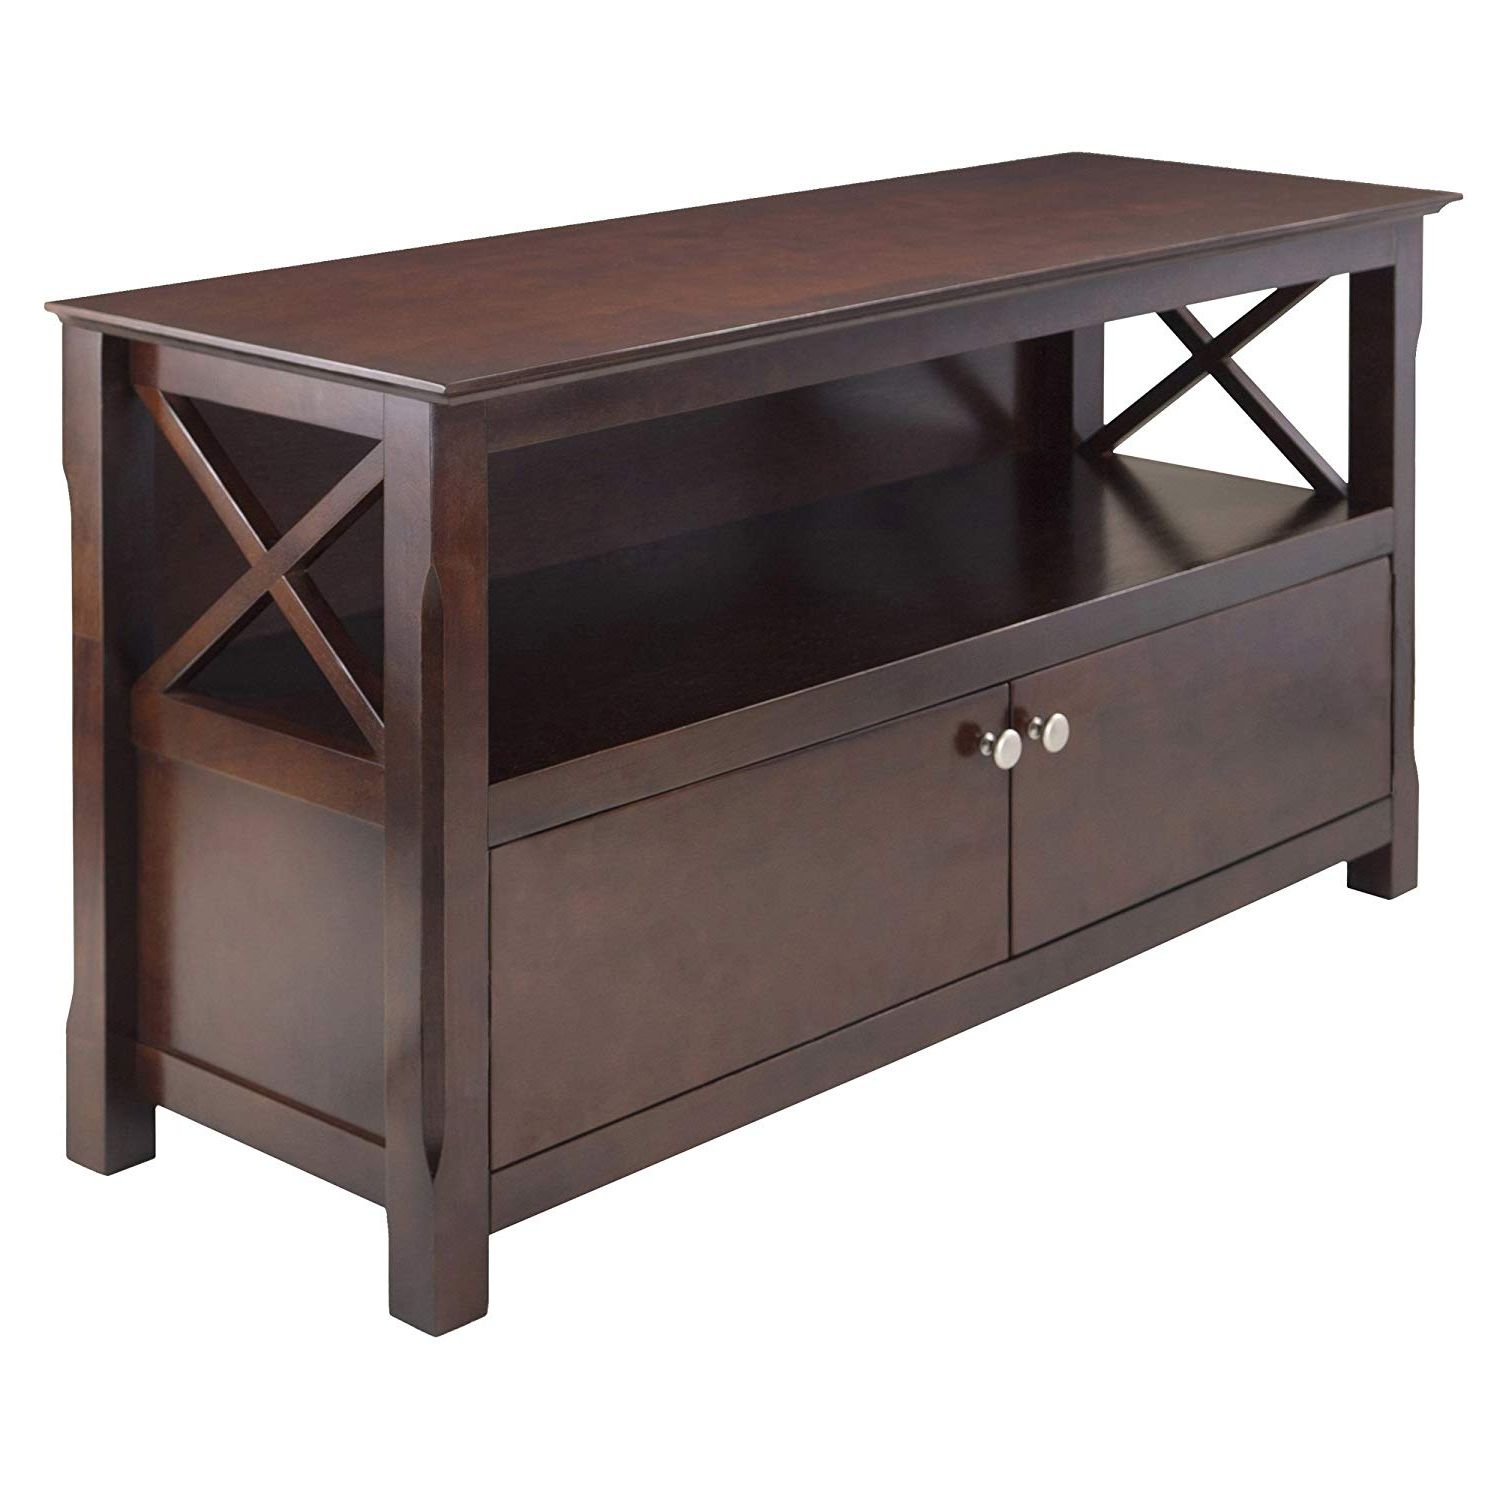 Amazon: Winsome Wood Xola Tv Stand: Kitchen & Dining Pertaining To Well Liked Wood Tv Stands (View 3 of 20)